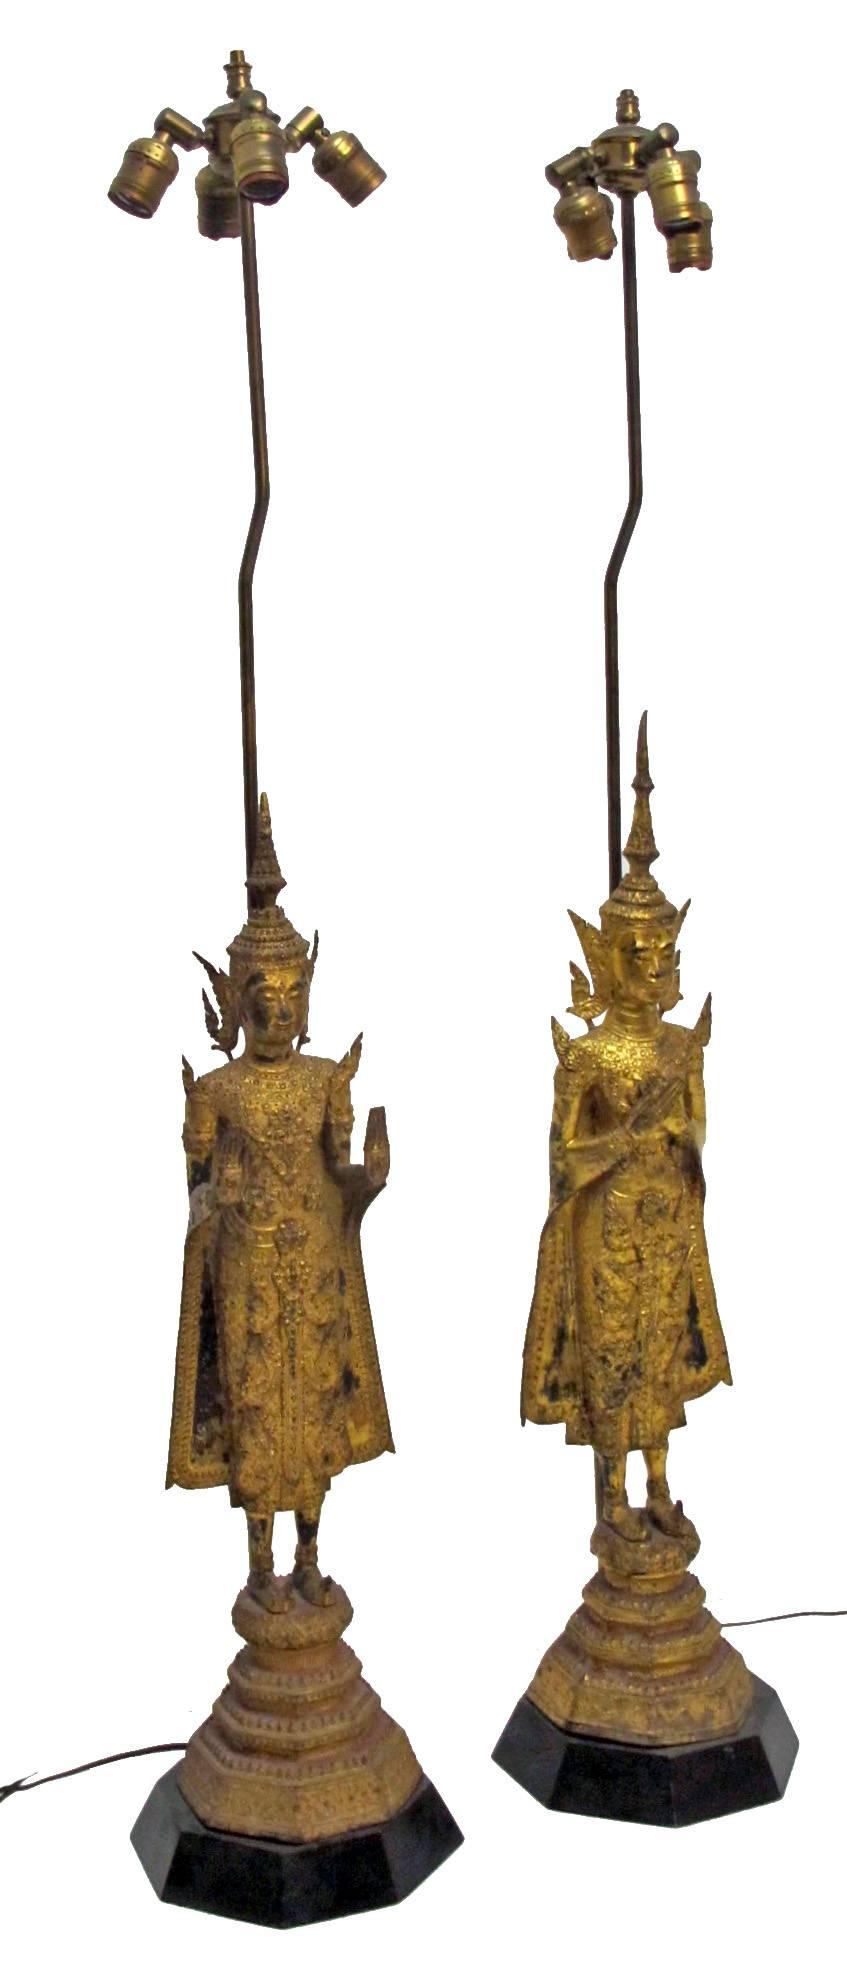 A large impressive pair of beautifully cast, lacquered and gilded bronze figures. Museum mounted on octagonal wood bases and converted to lamps in the mid-20th century (the bronze sculptures were not harmed or drilled in the process). Newly